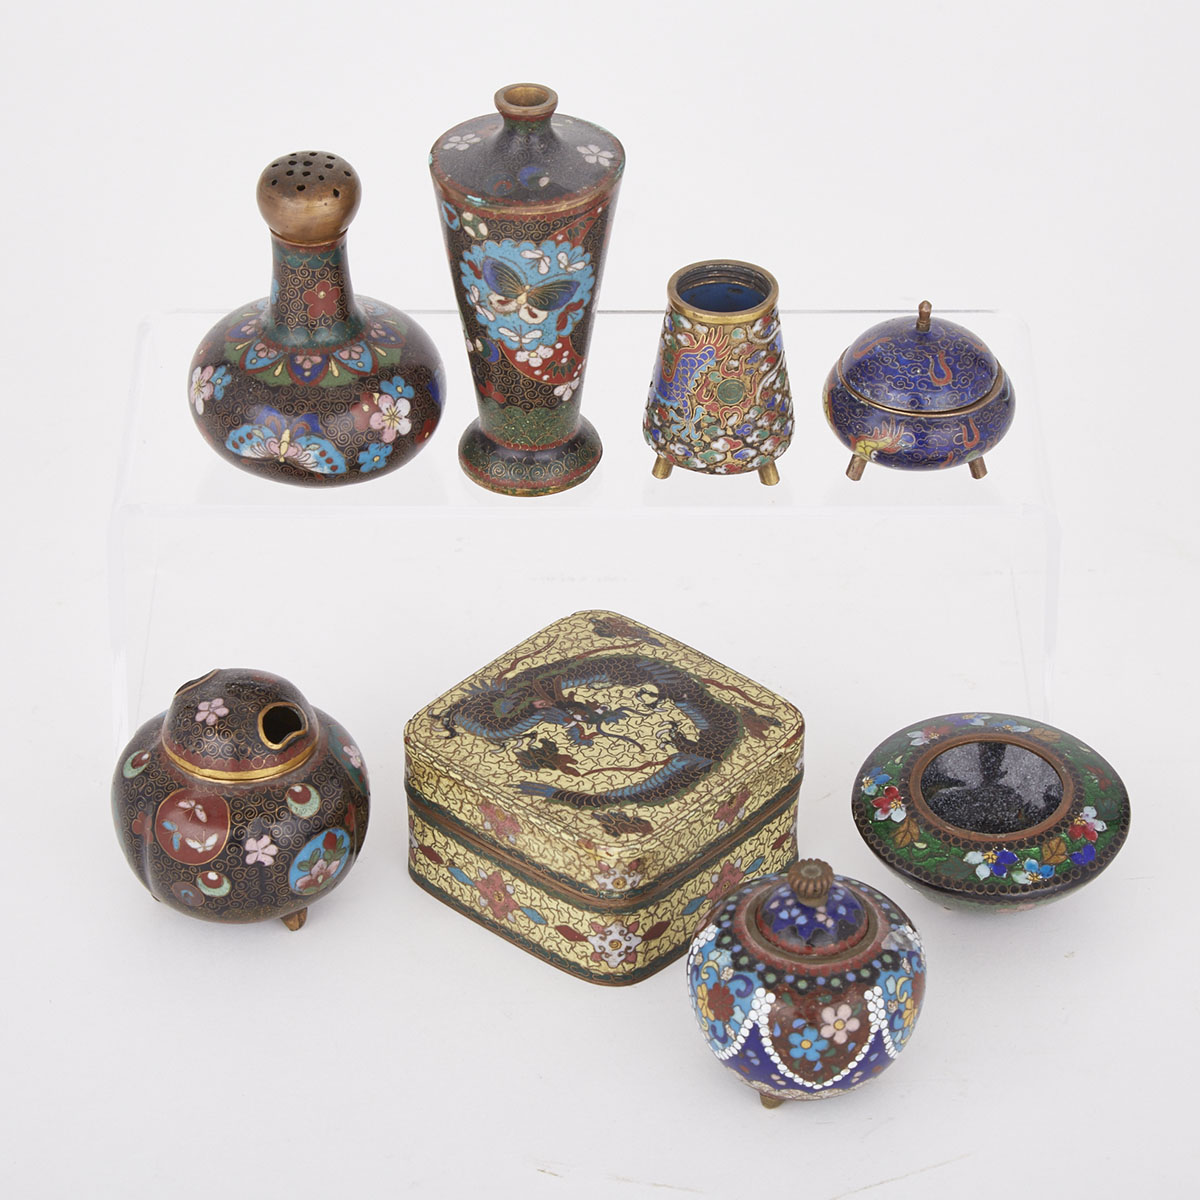 Group of Eight Cloisonne Pieces, Late 19th/Early 20th Century